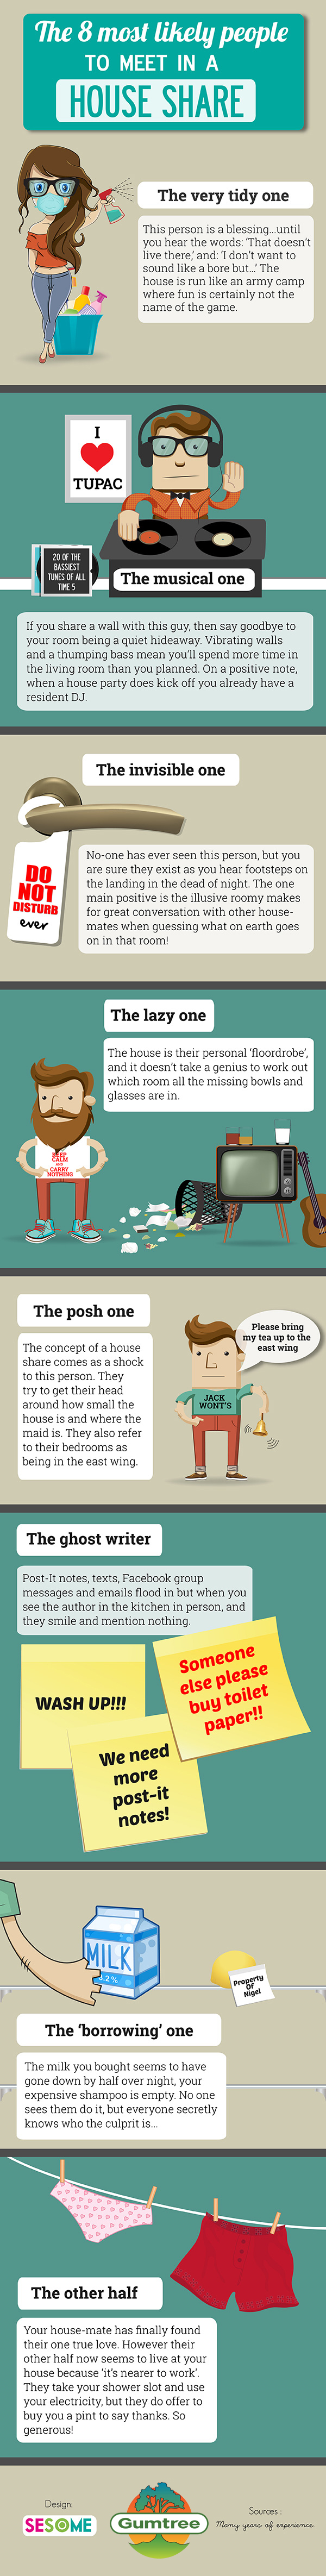 house share mates infographic